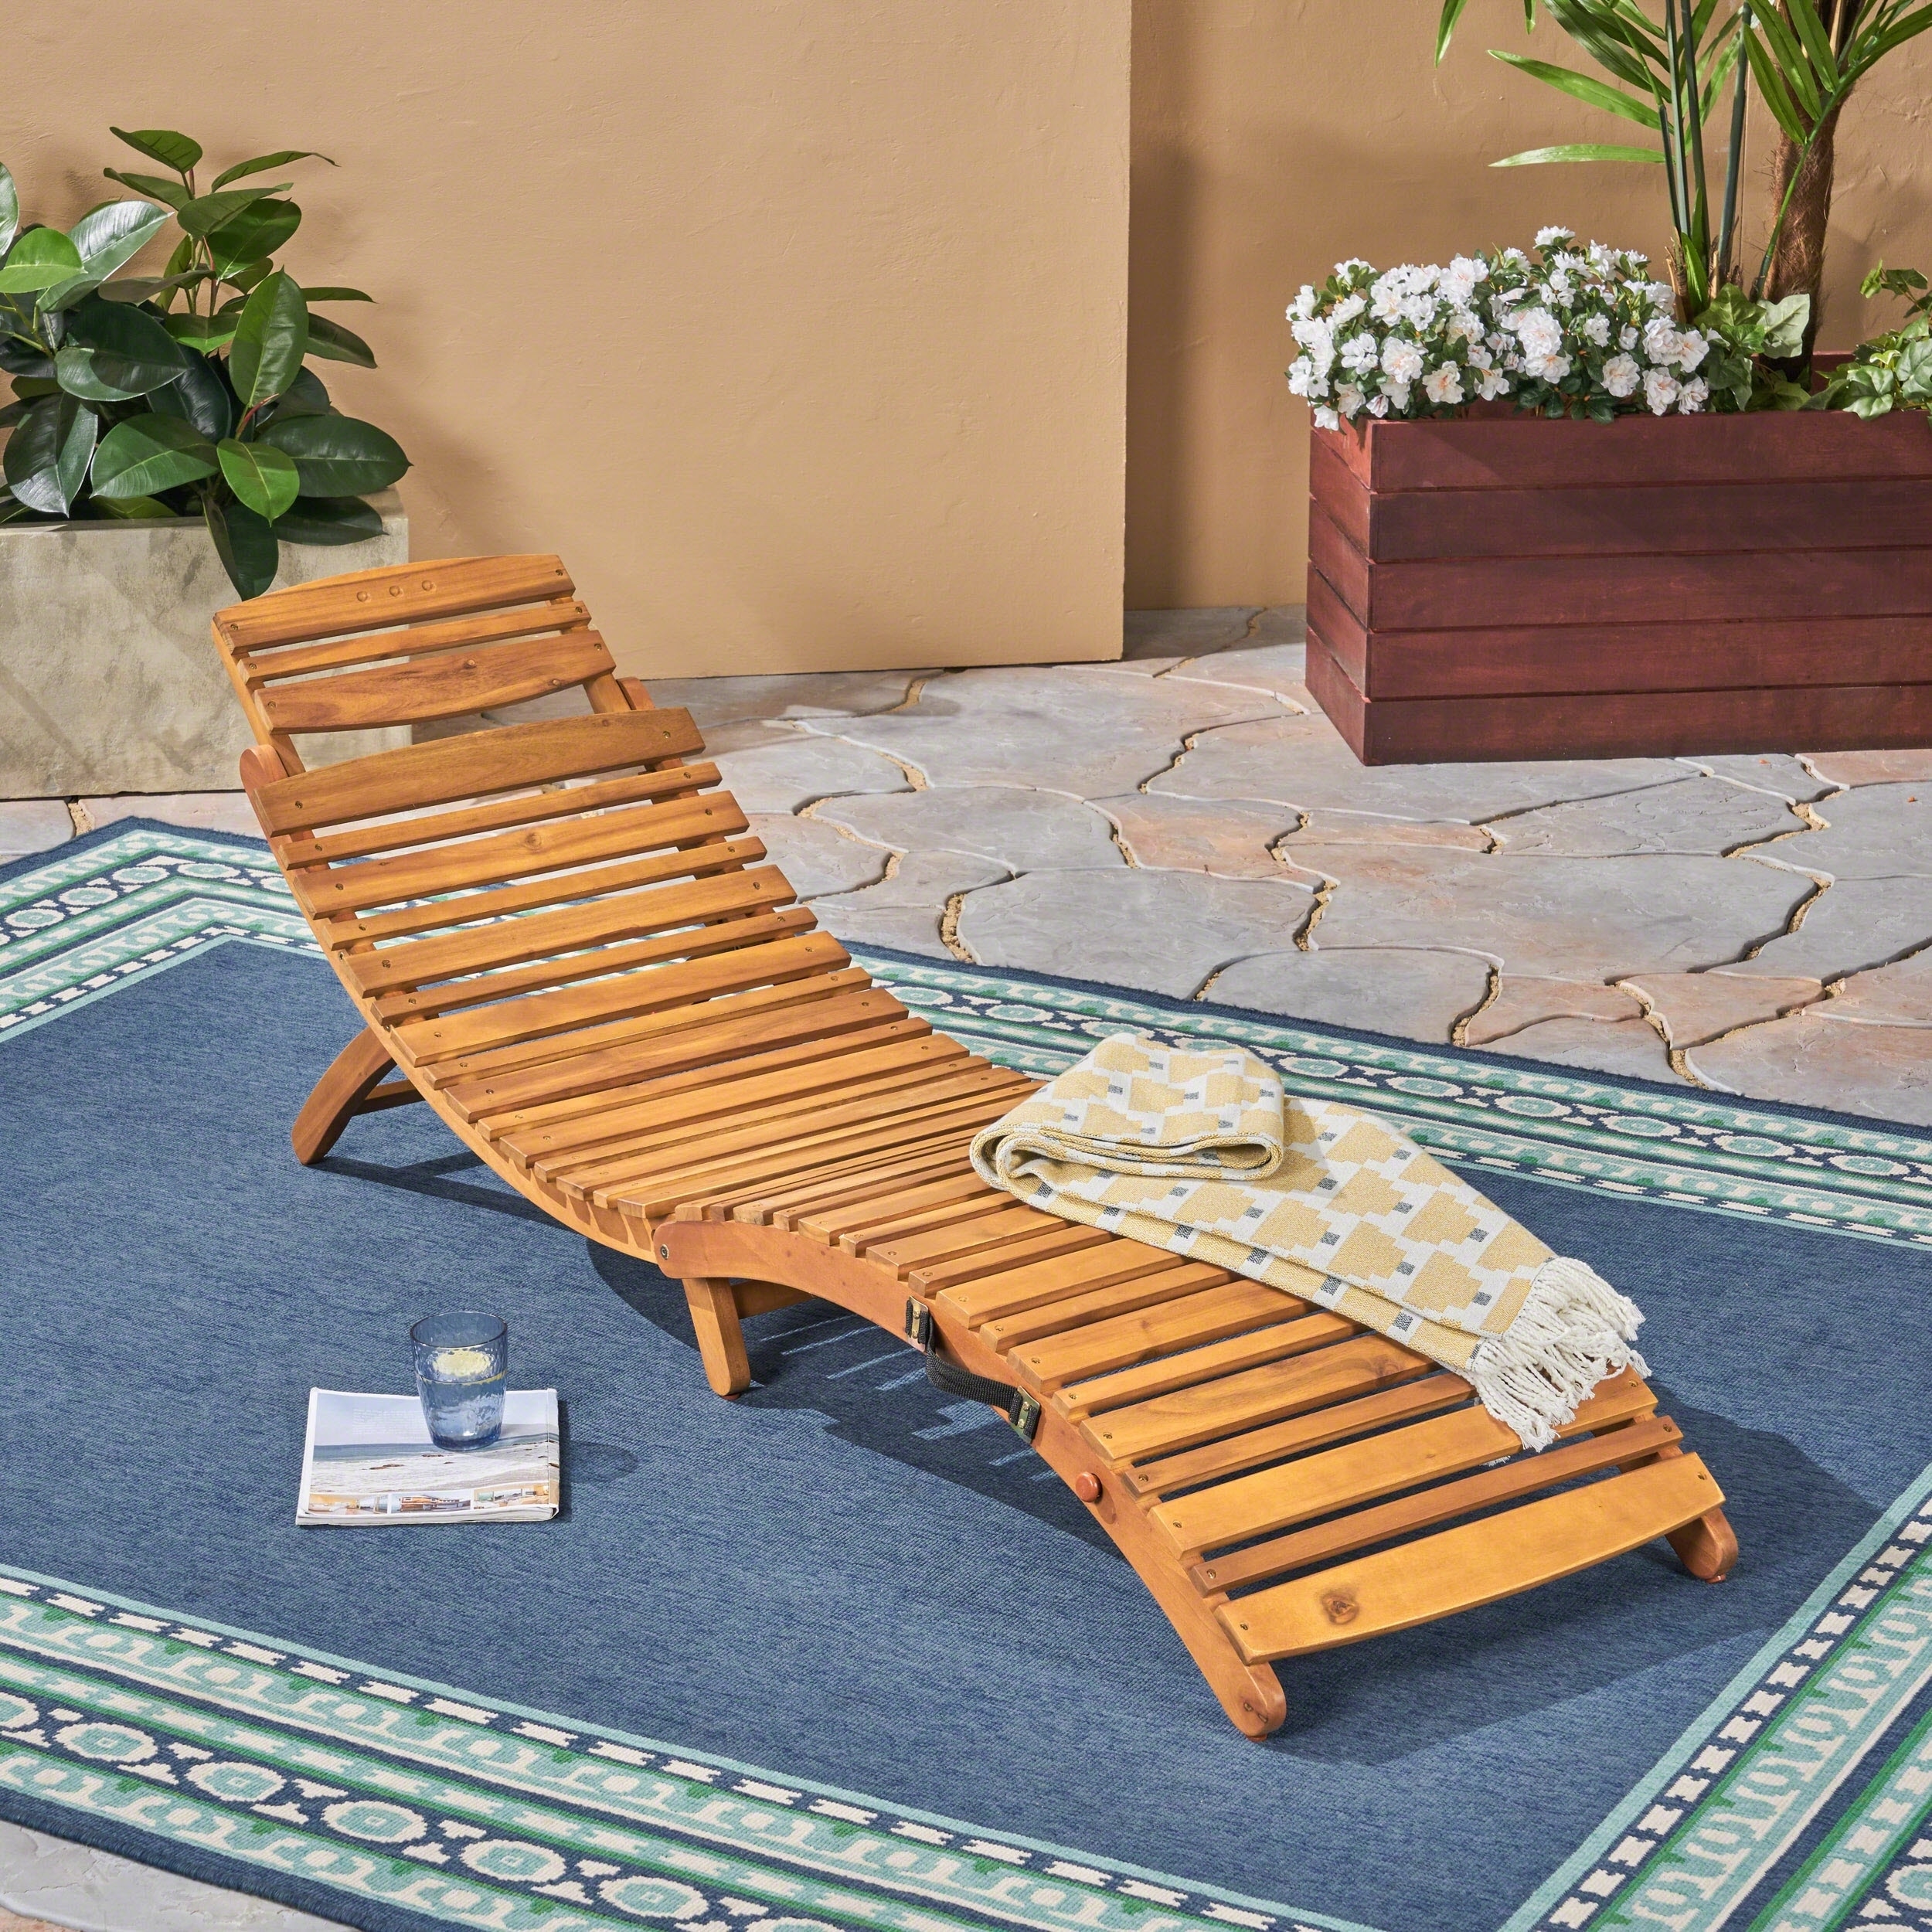 Buy Top Rated Outdoor Chaise Lounges Online At Overstockcom Our